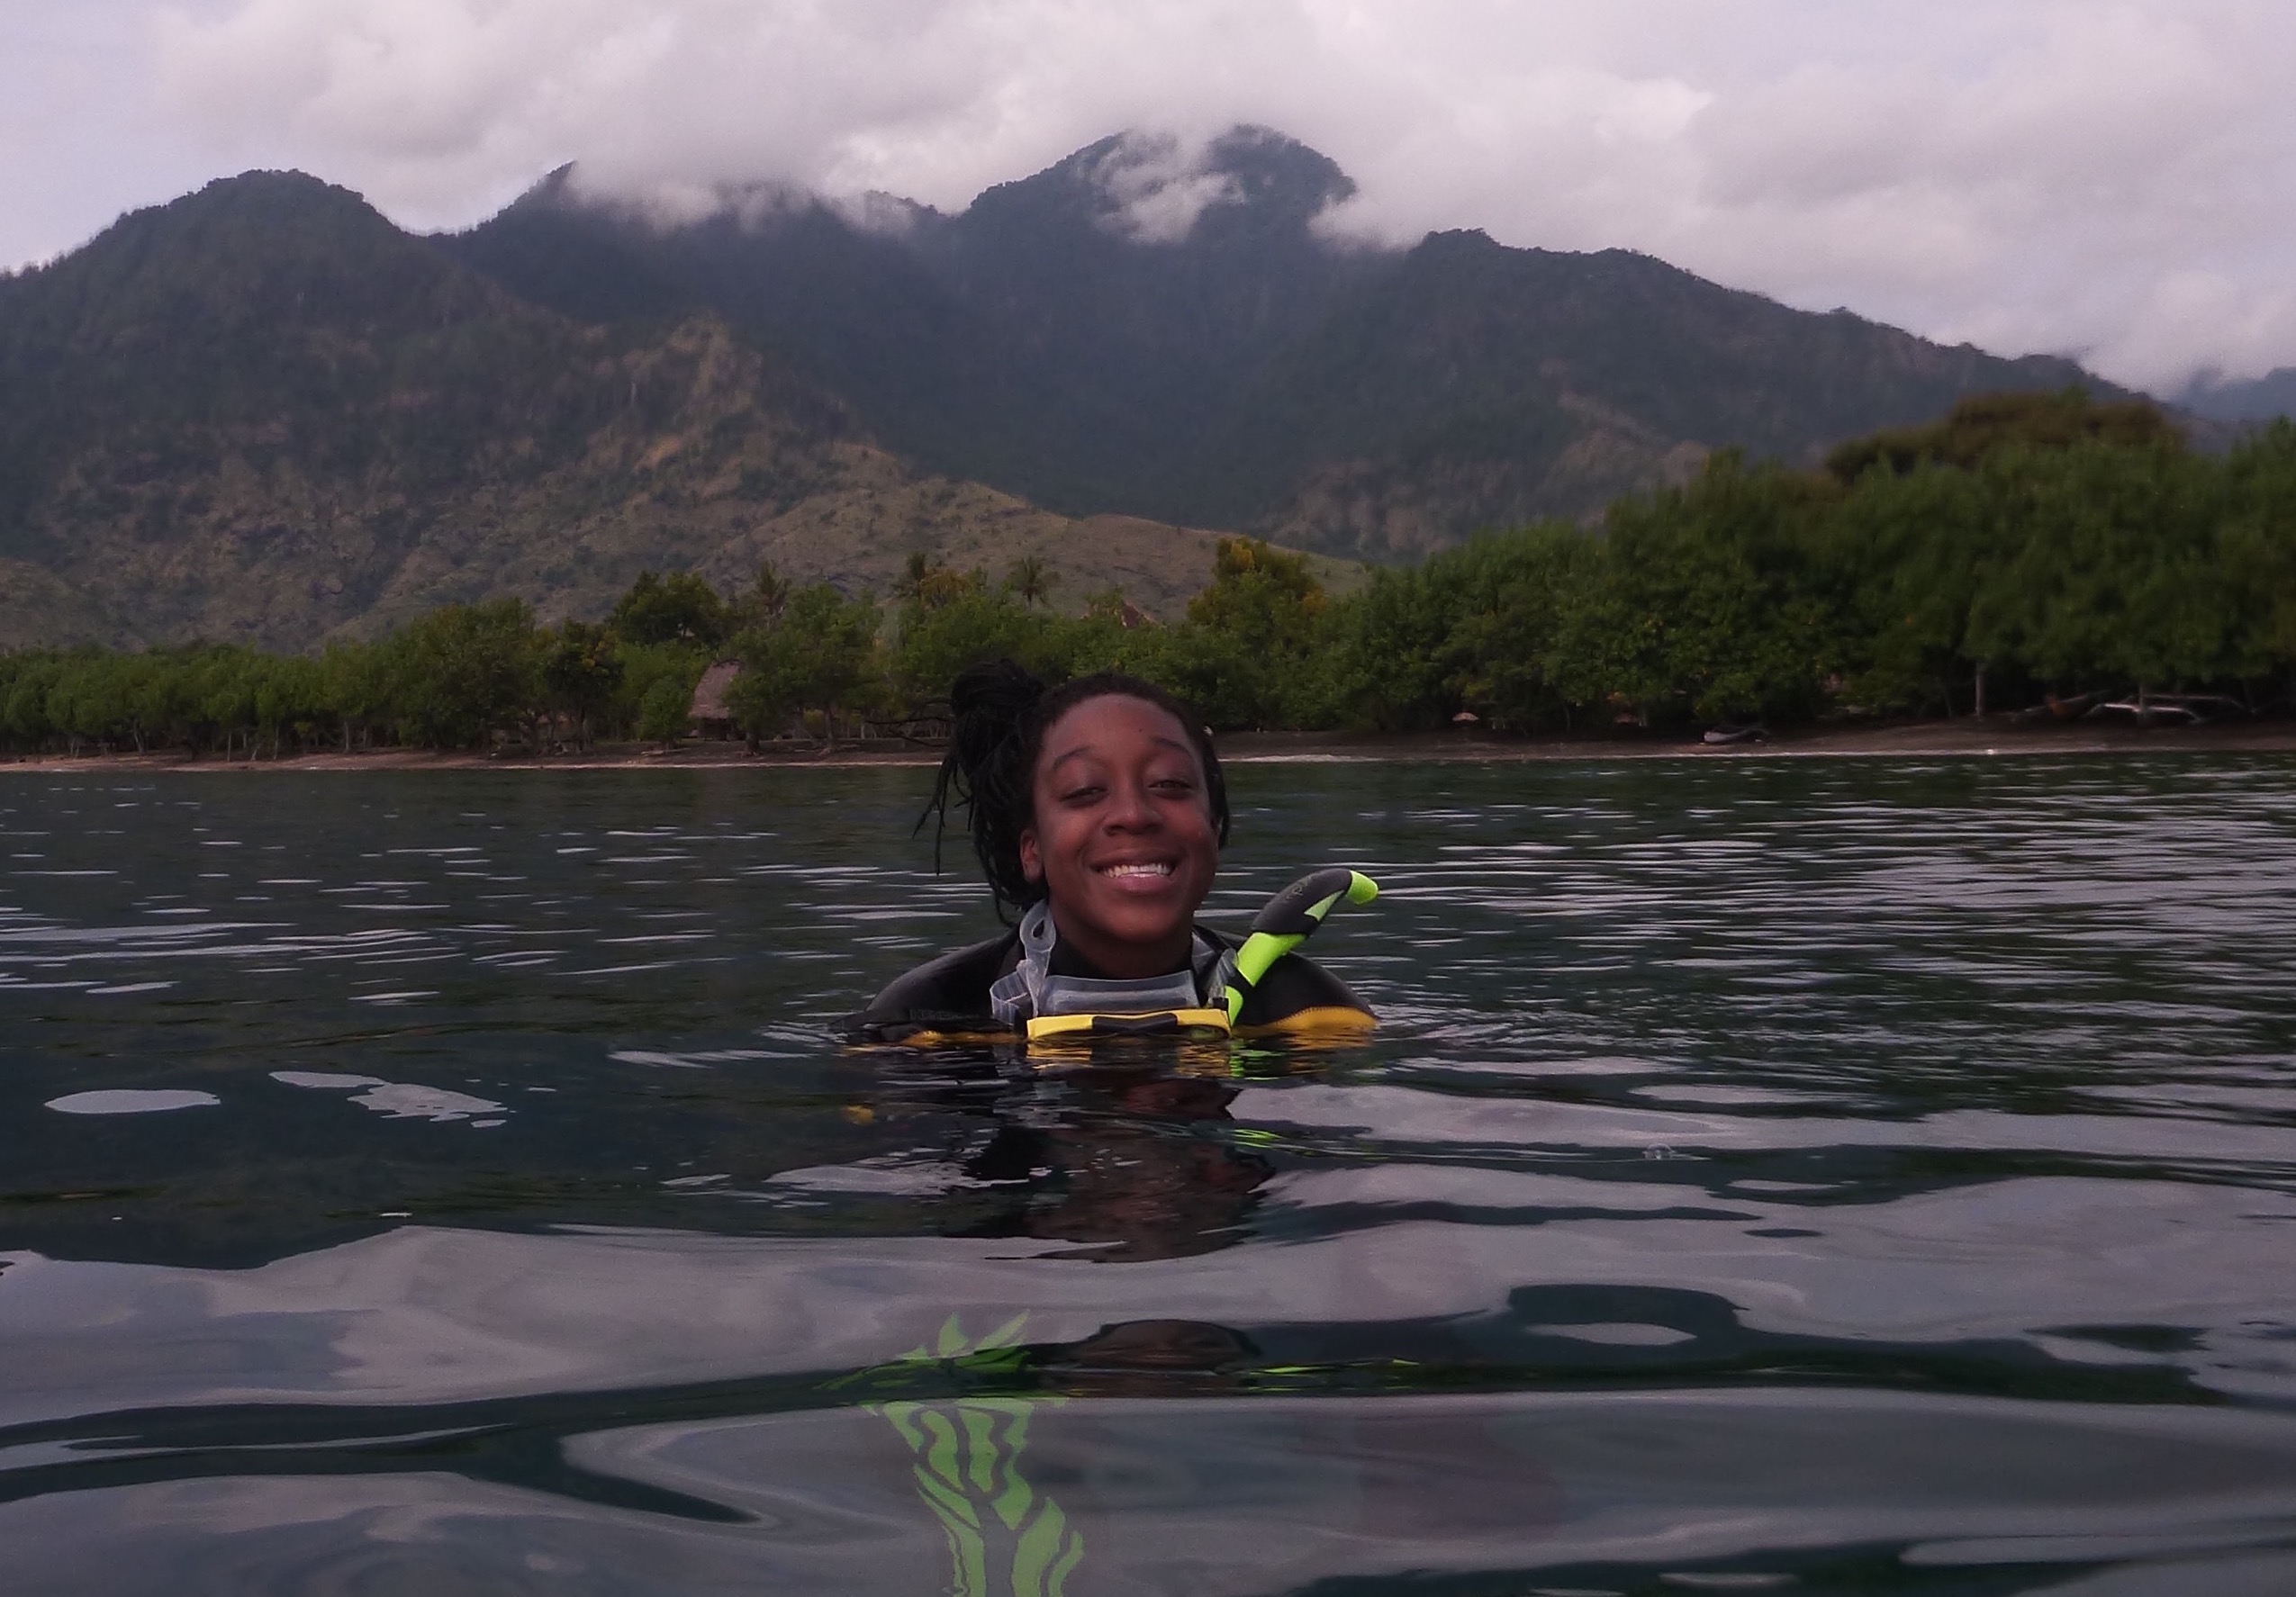 Camille Gaynus in scuba gear in the water with mountains in the background